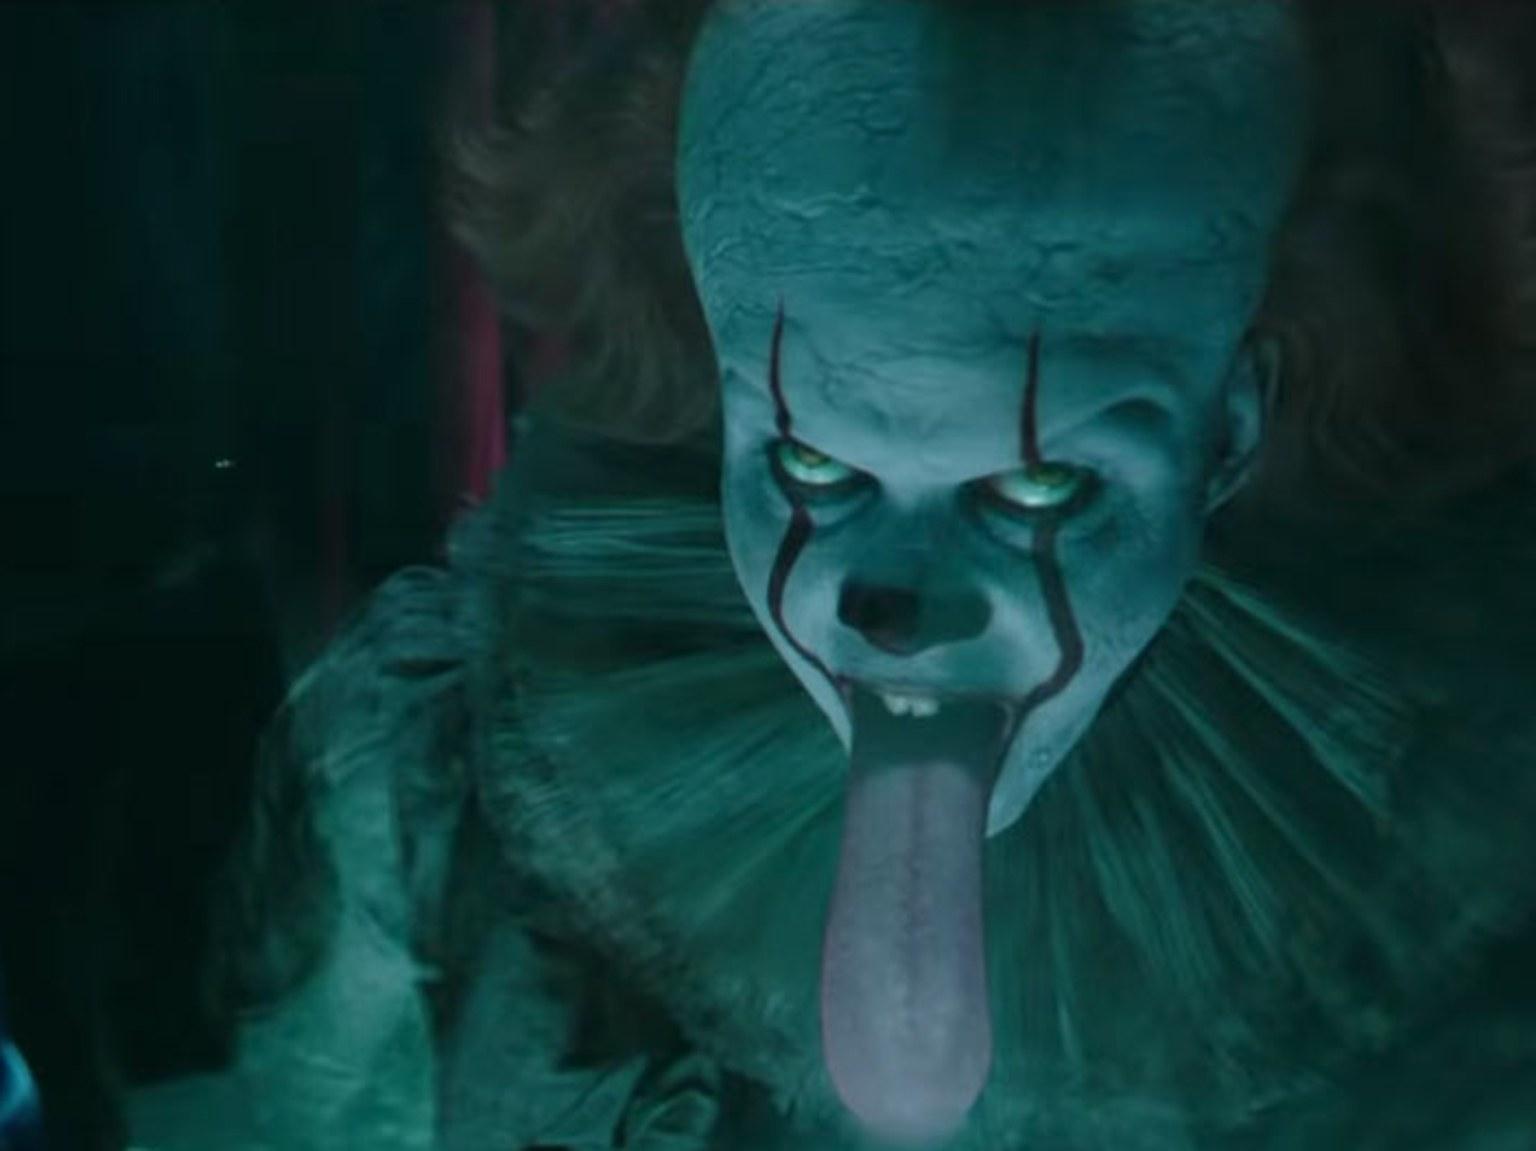 It Chapter Trailer Stars Jessica Chastain and Pennywise’s Tongue